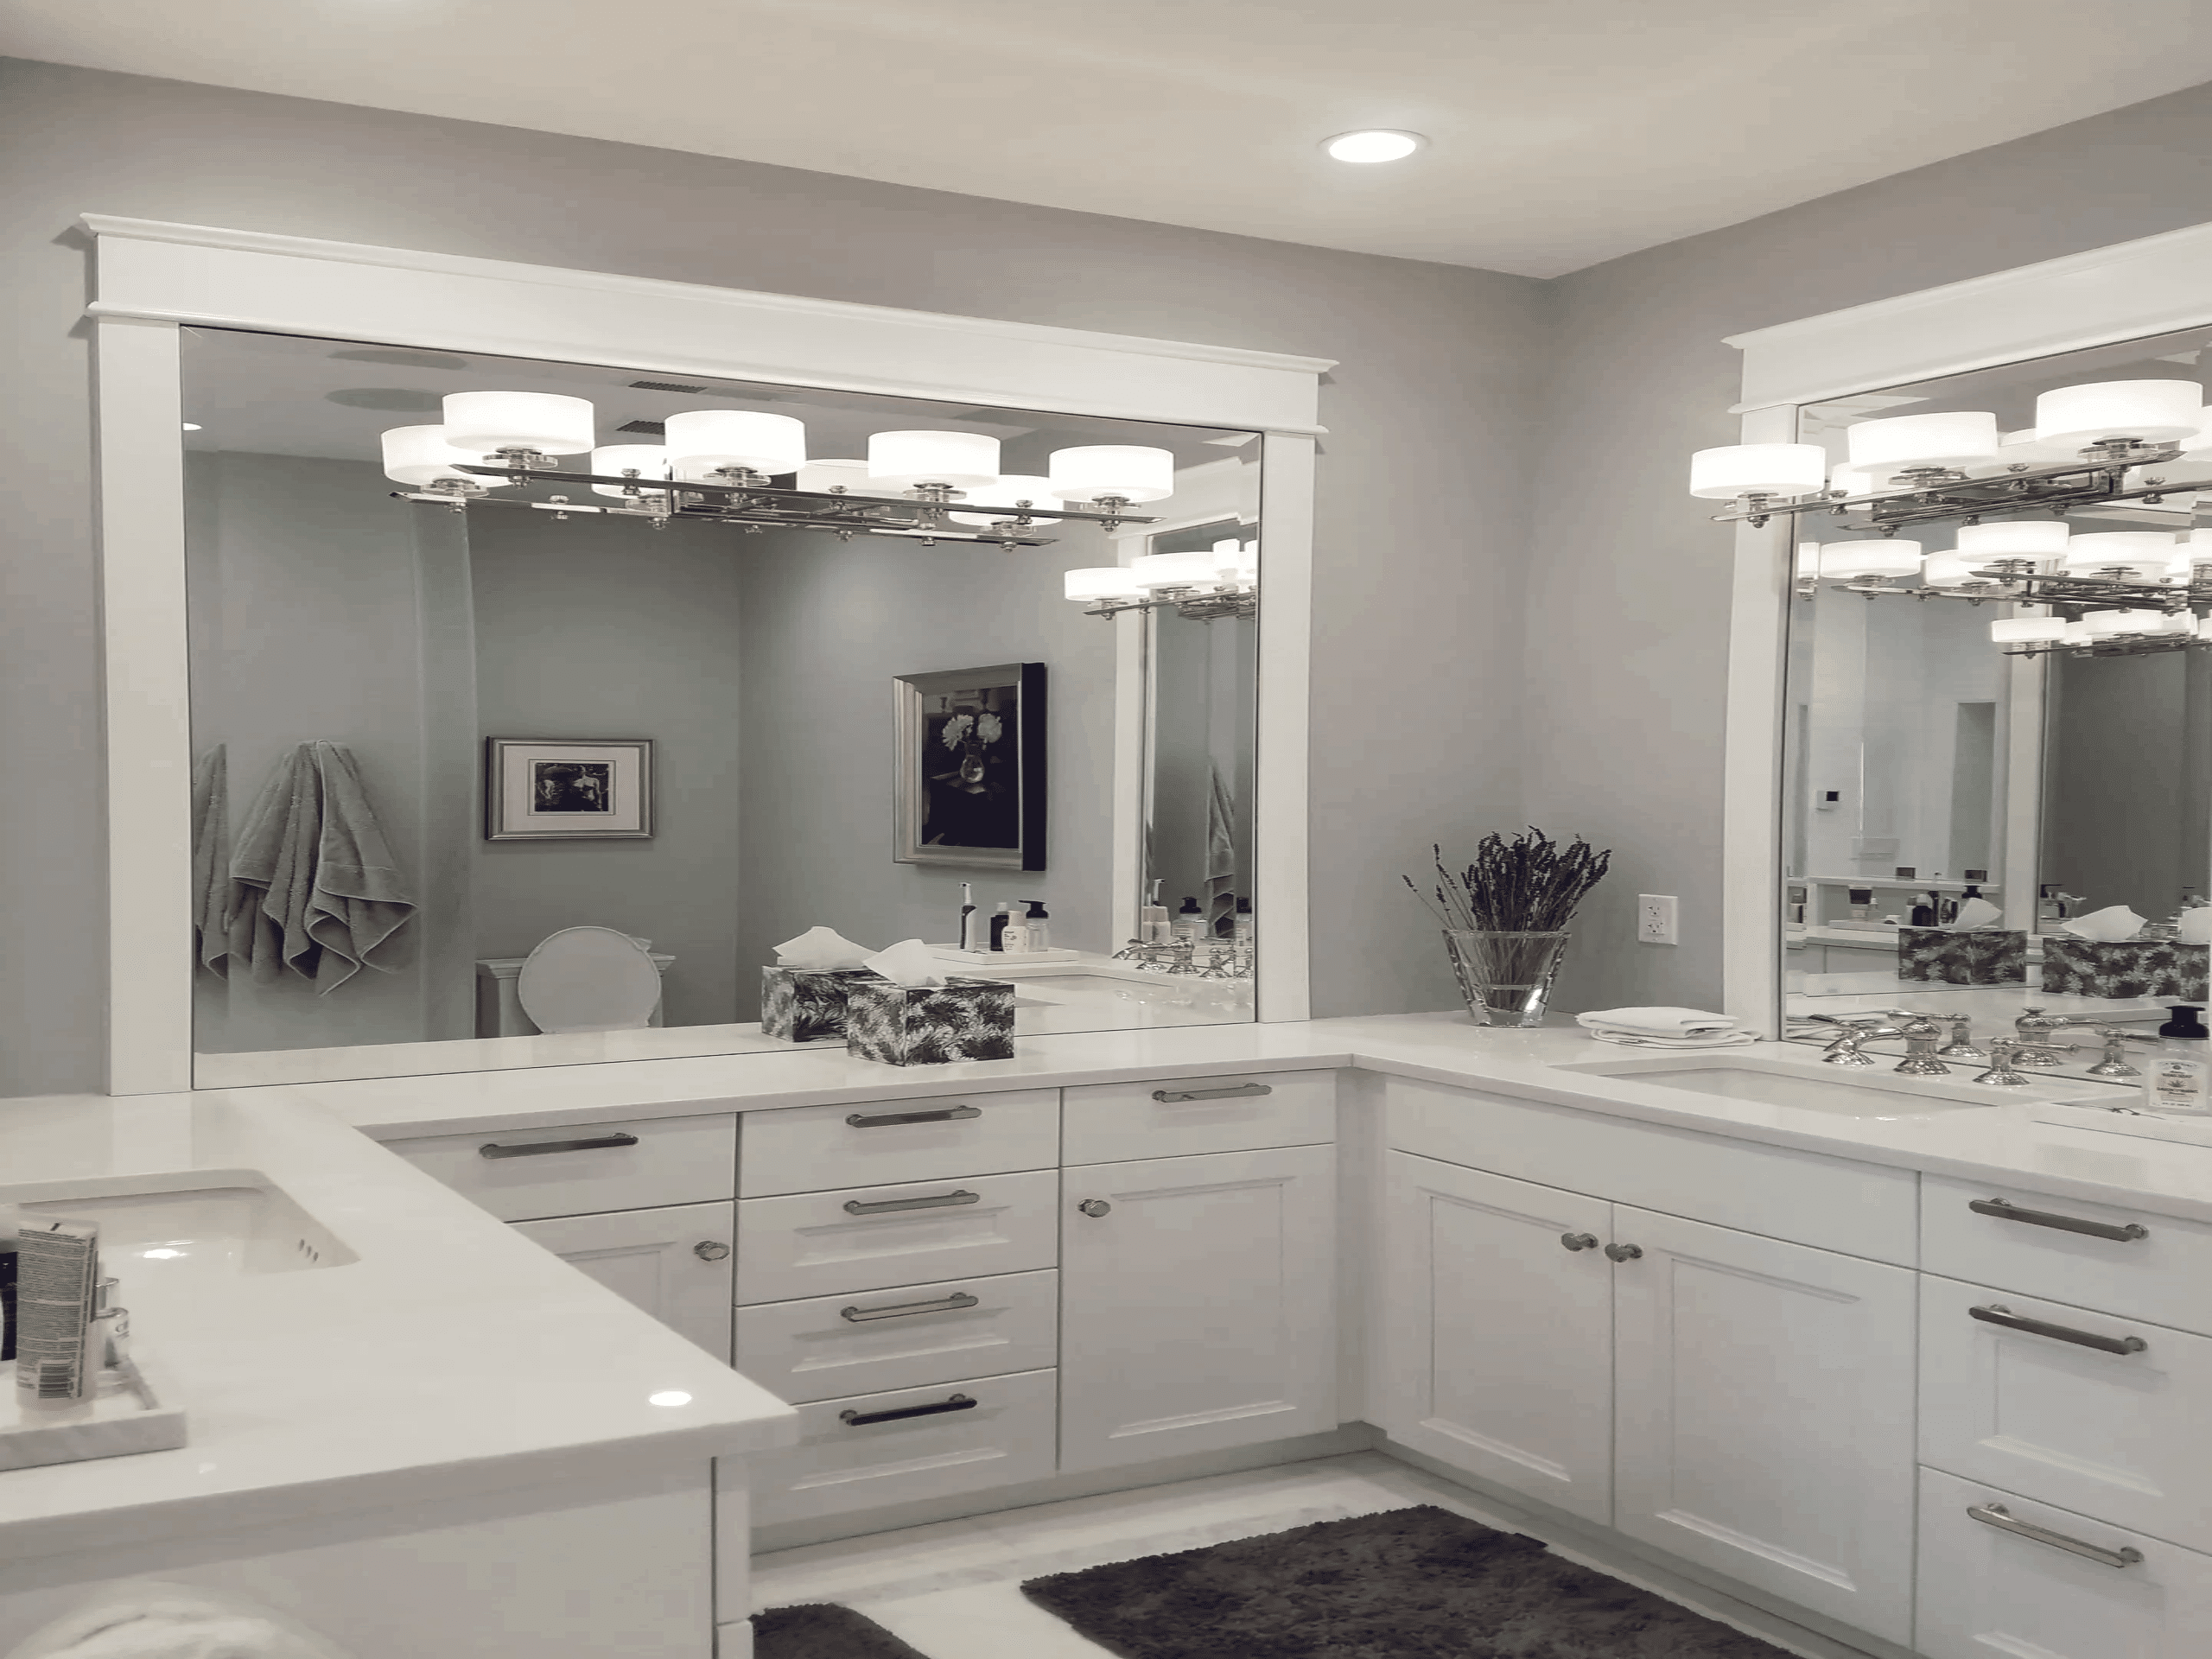 A bathroom vanity with large mirrors and a fresh, white aesthetic